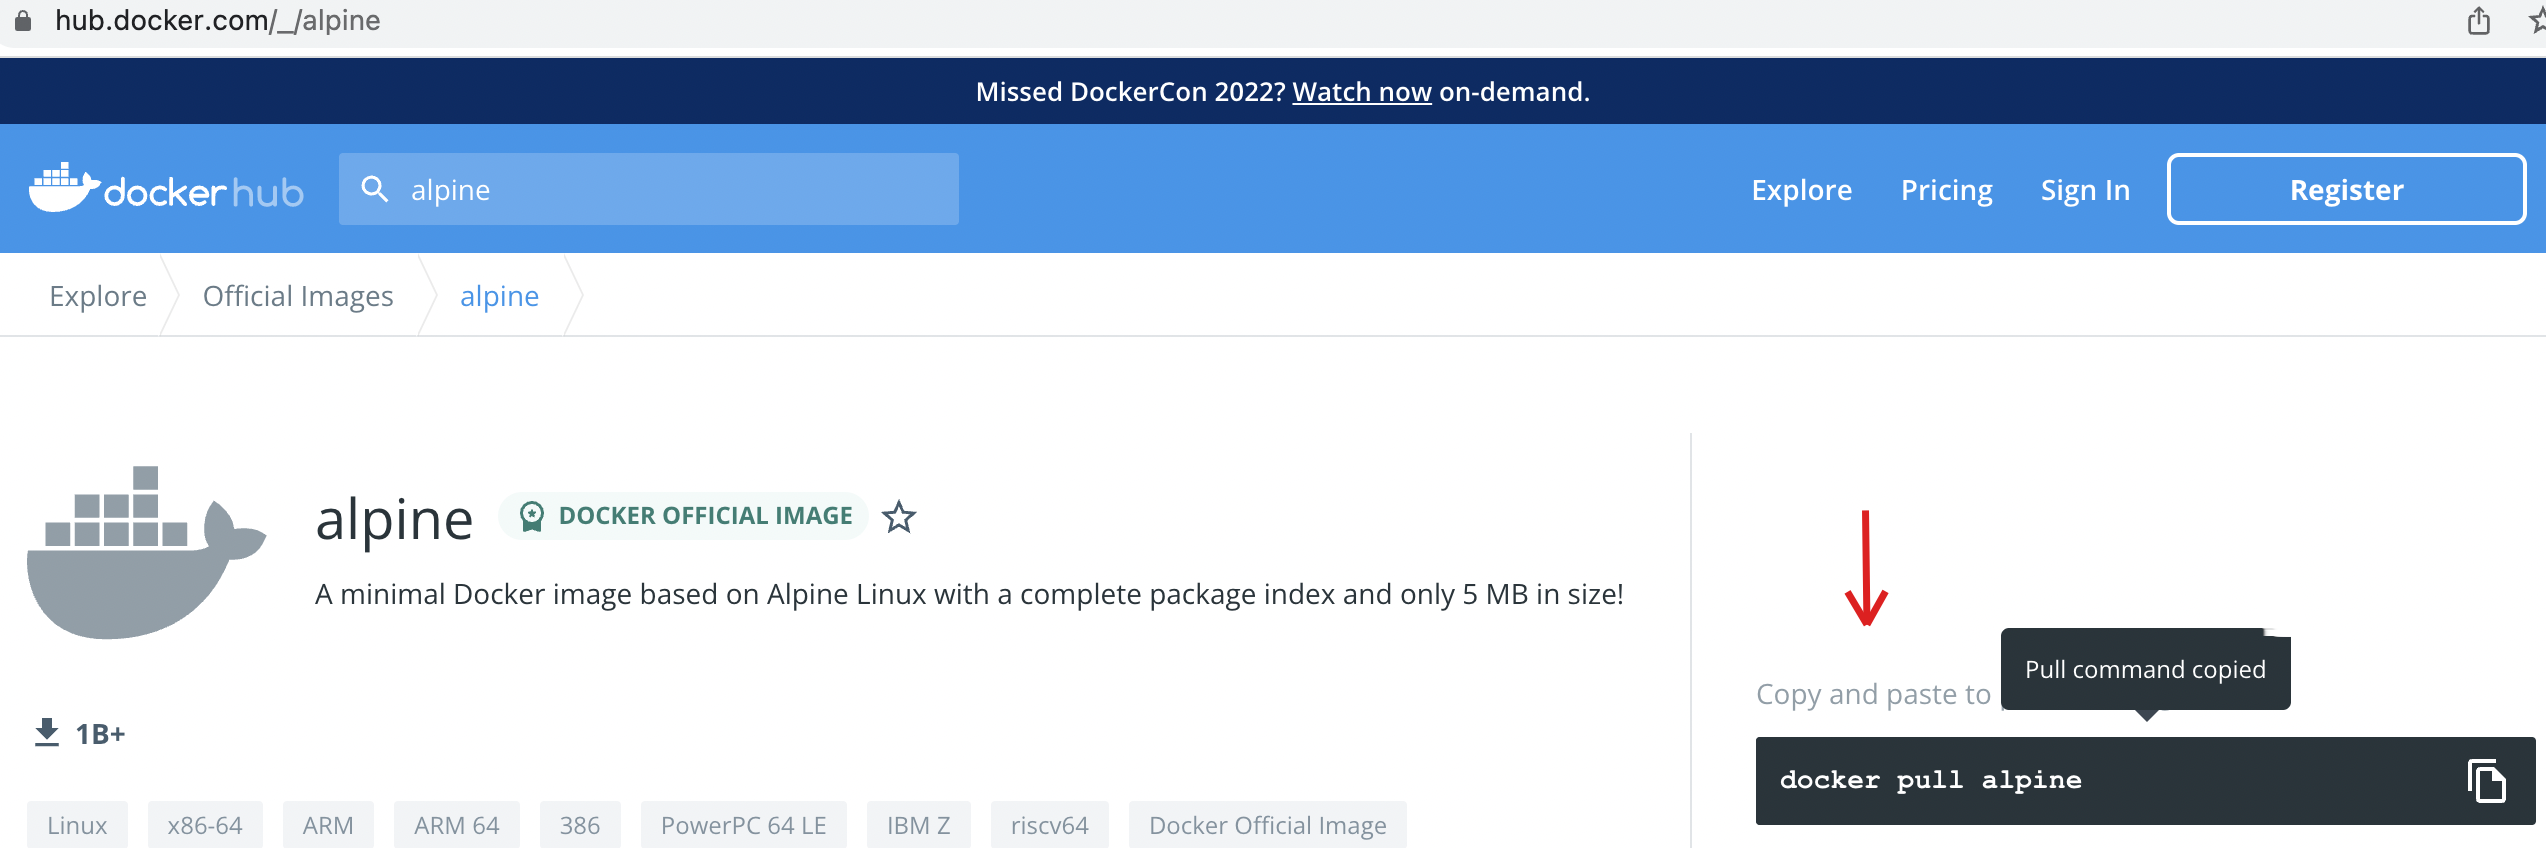 Containers pull docker from dockerhub.